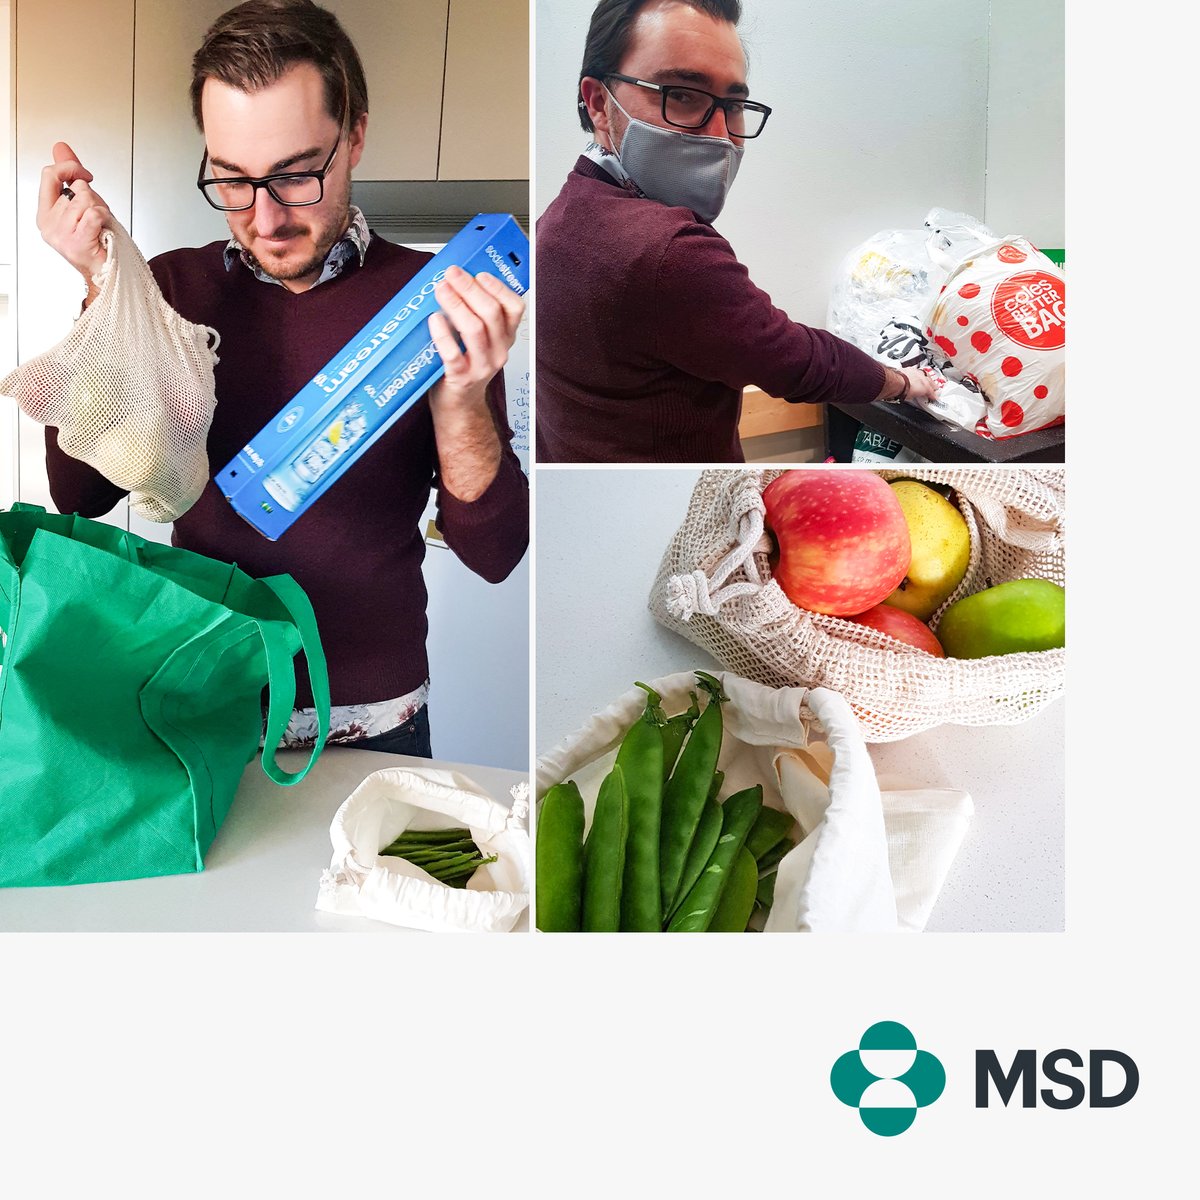 Helping #people & the #planet stay #healthy, including steps at home to reduce waste, is what gets Daniel out of bed in the morning. See highlights from our ESG Progress Report to learn how all of us at MSD make a difference for the environment: msd.com/stories/find-o… #WeAreMSD